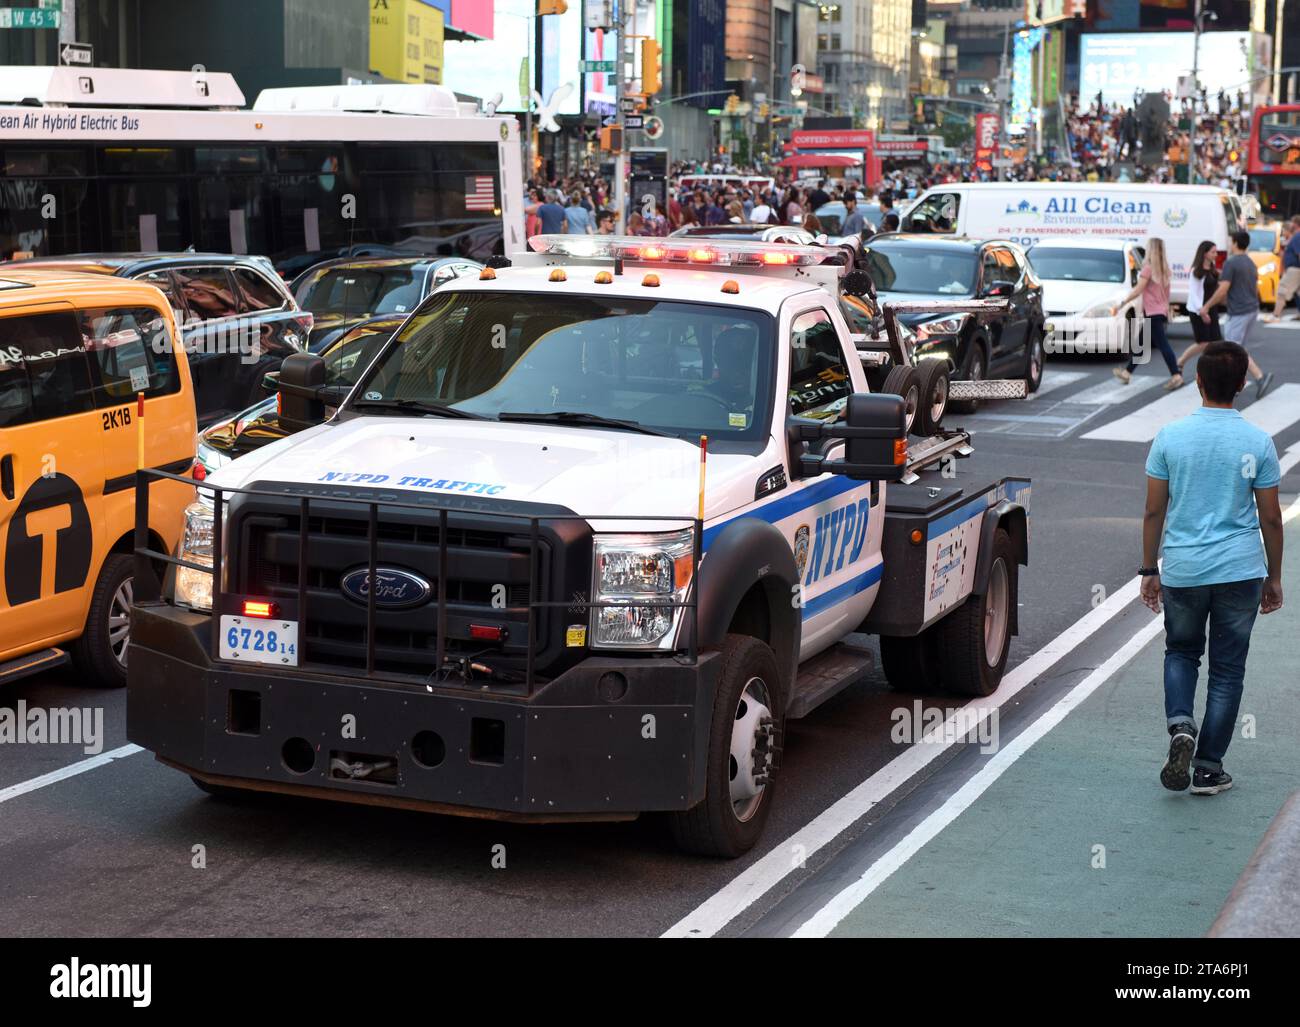 NEW YORK, USA - May 24, 2018: Police car of the New York City Police Department (NYPD) on the streets of Manhattan. Stock Photo